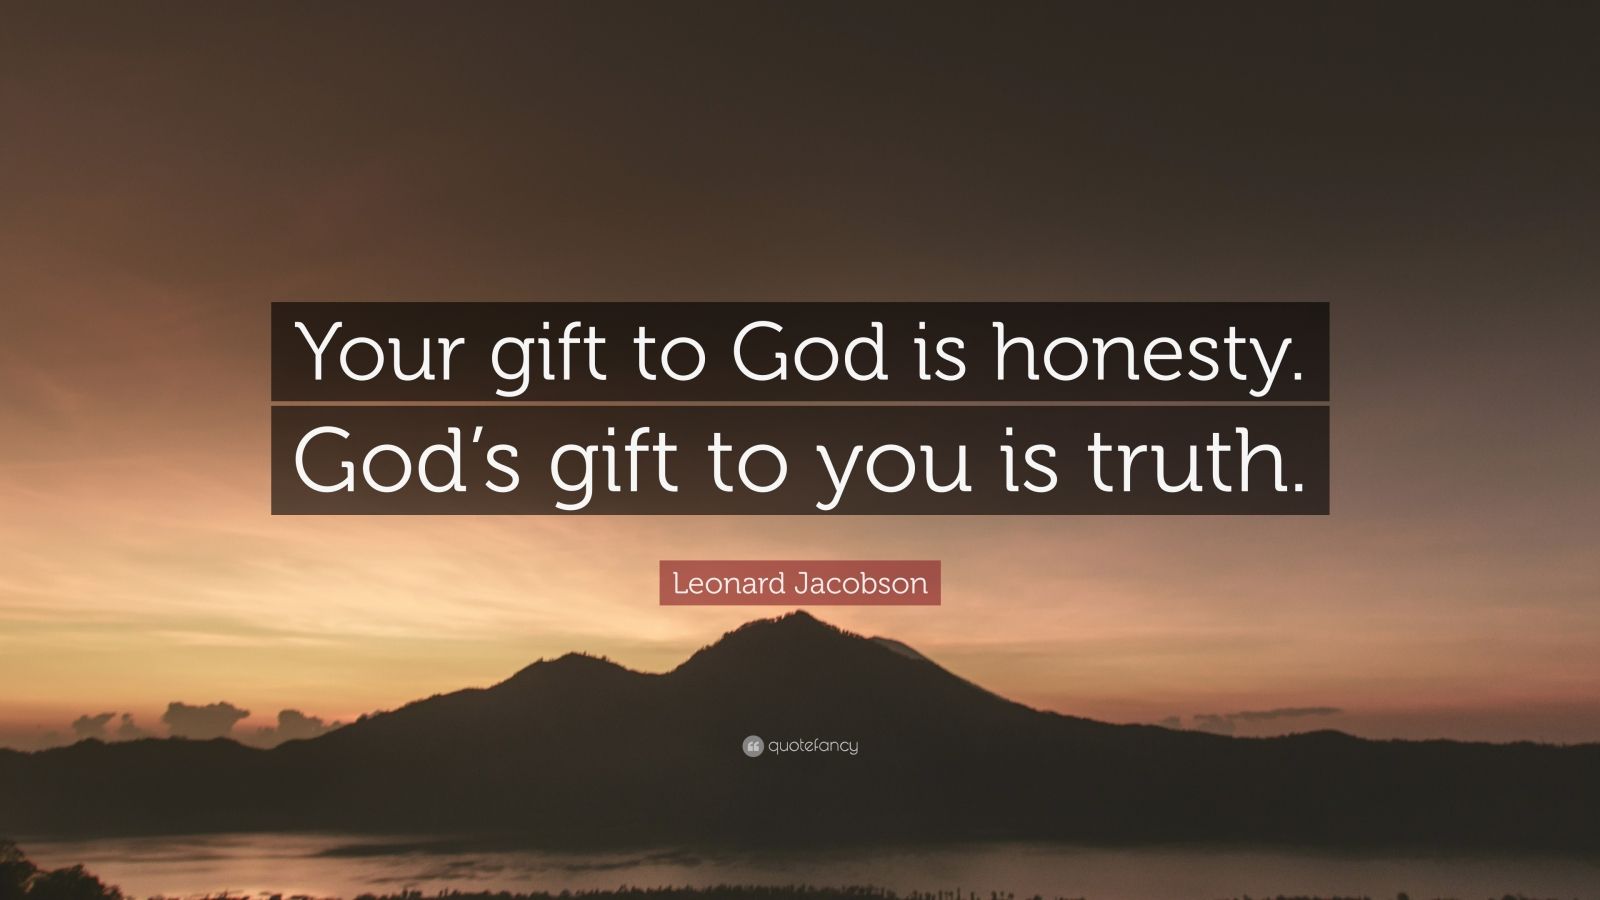 Leonard Jacobson Quote: "Your gift to God is honesty. God ...